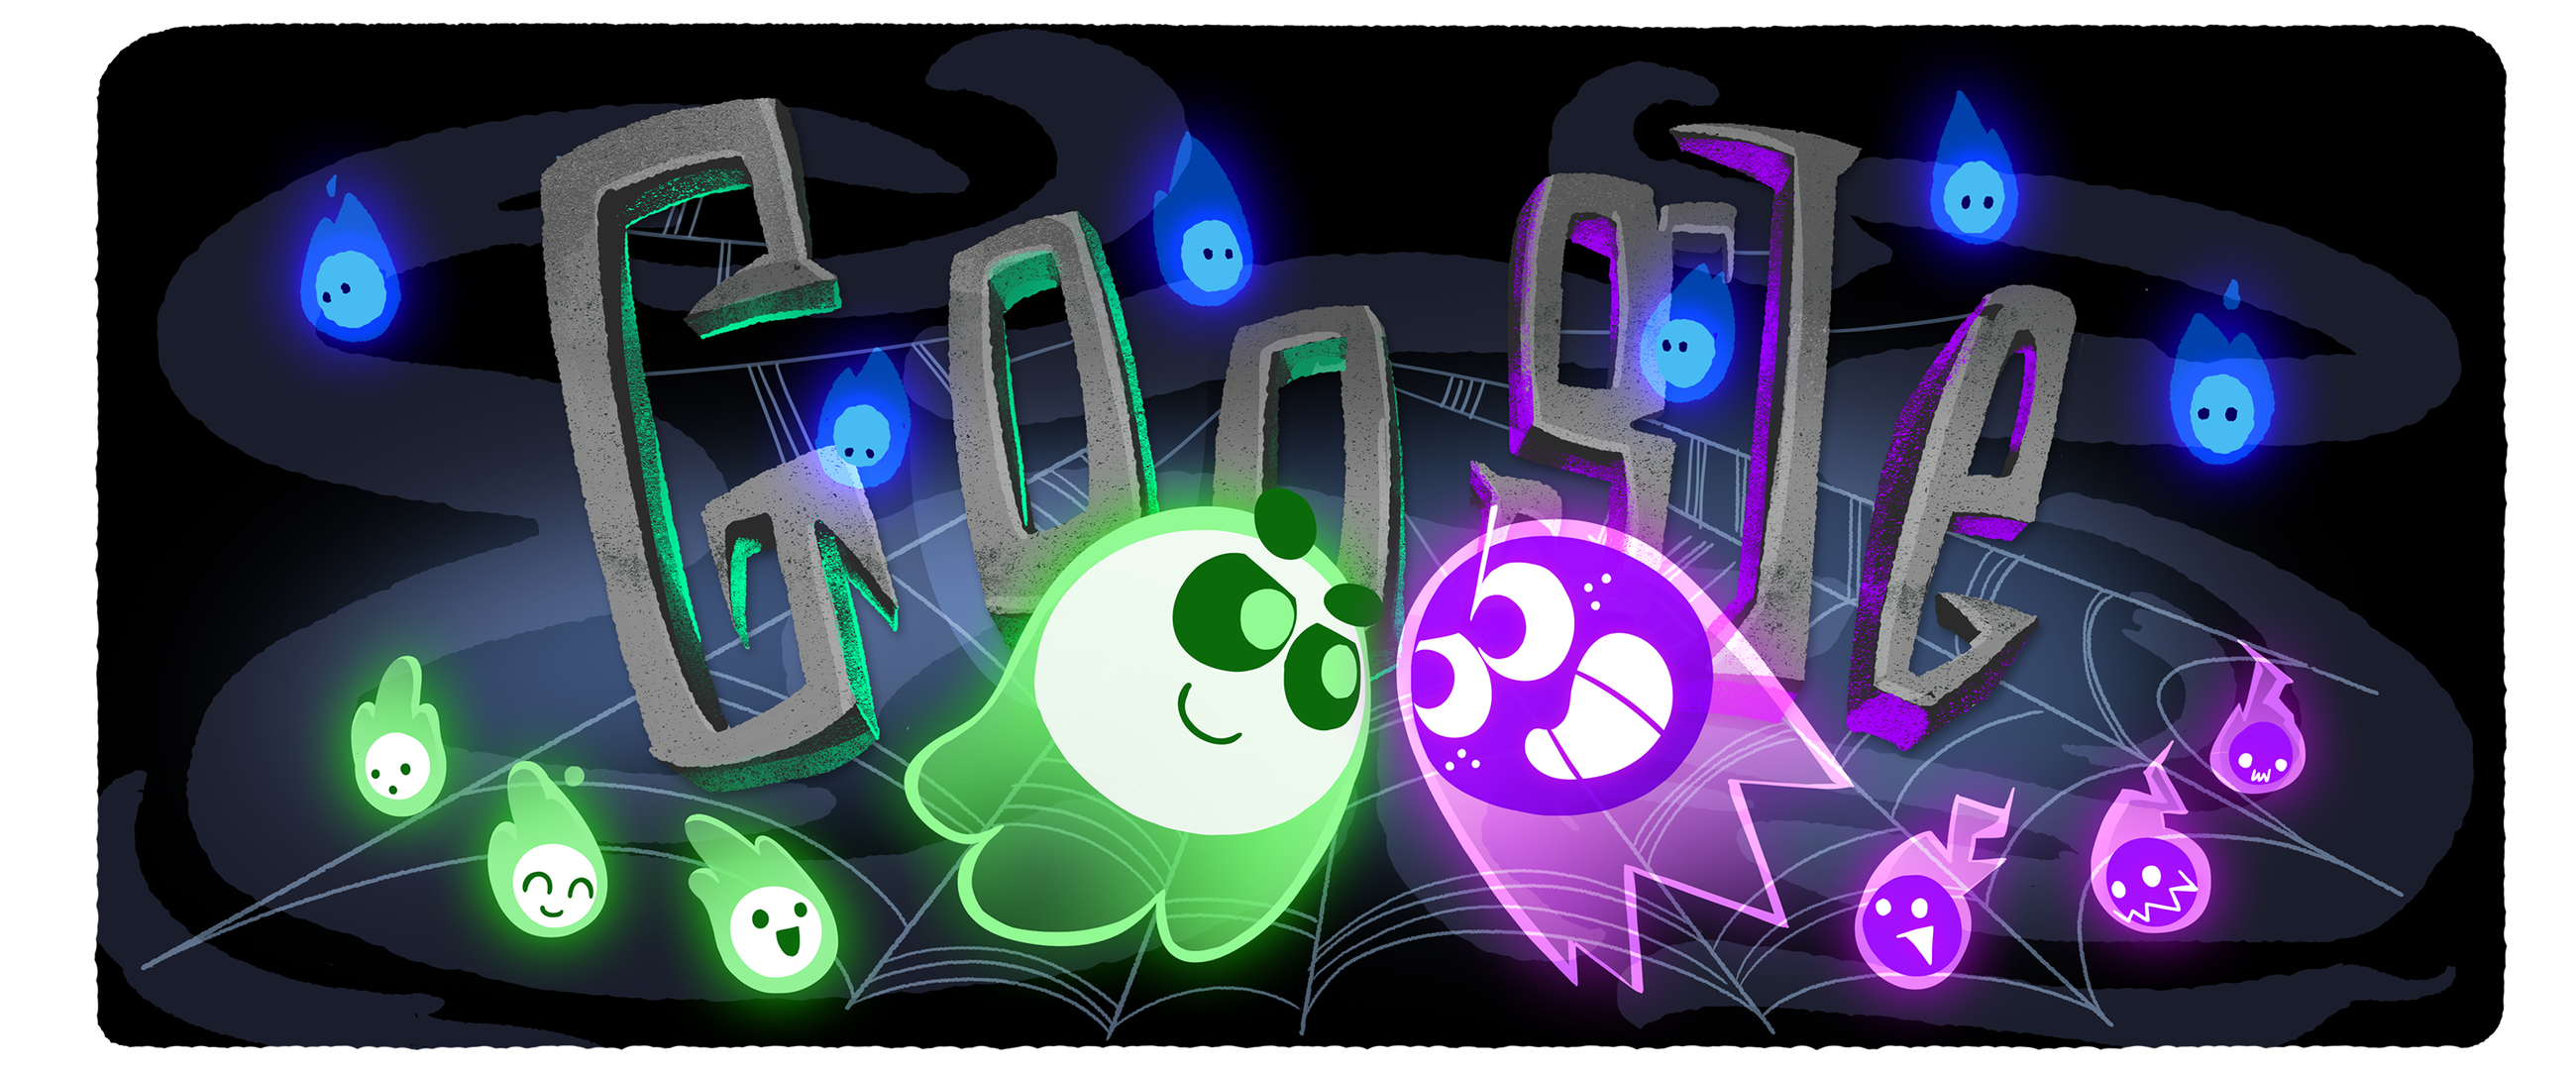 Google introduces its first multiplayer Doodle game for Halloween